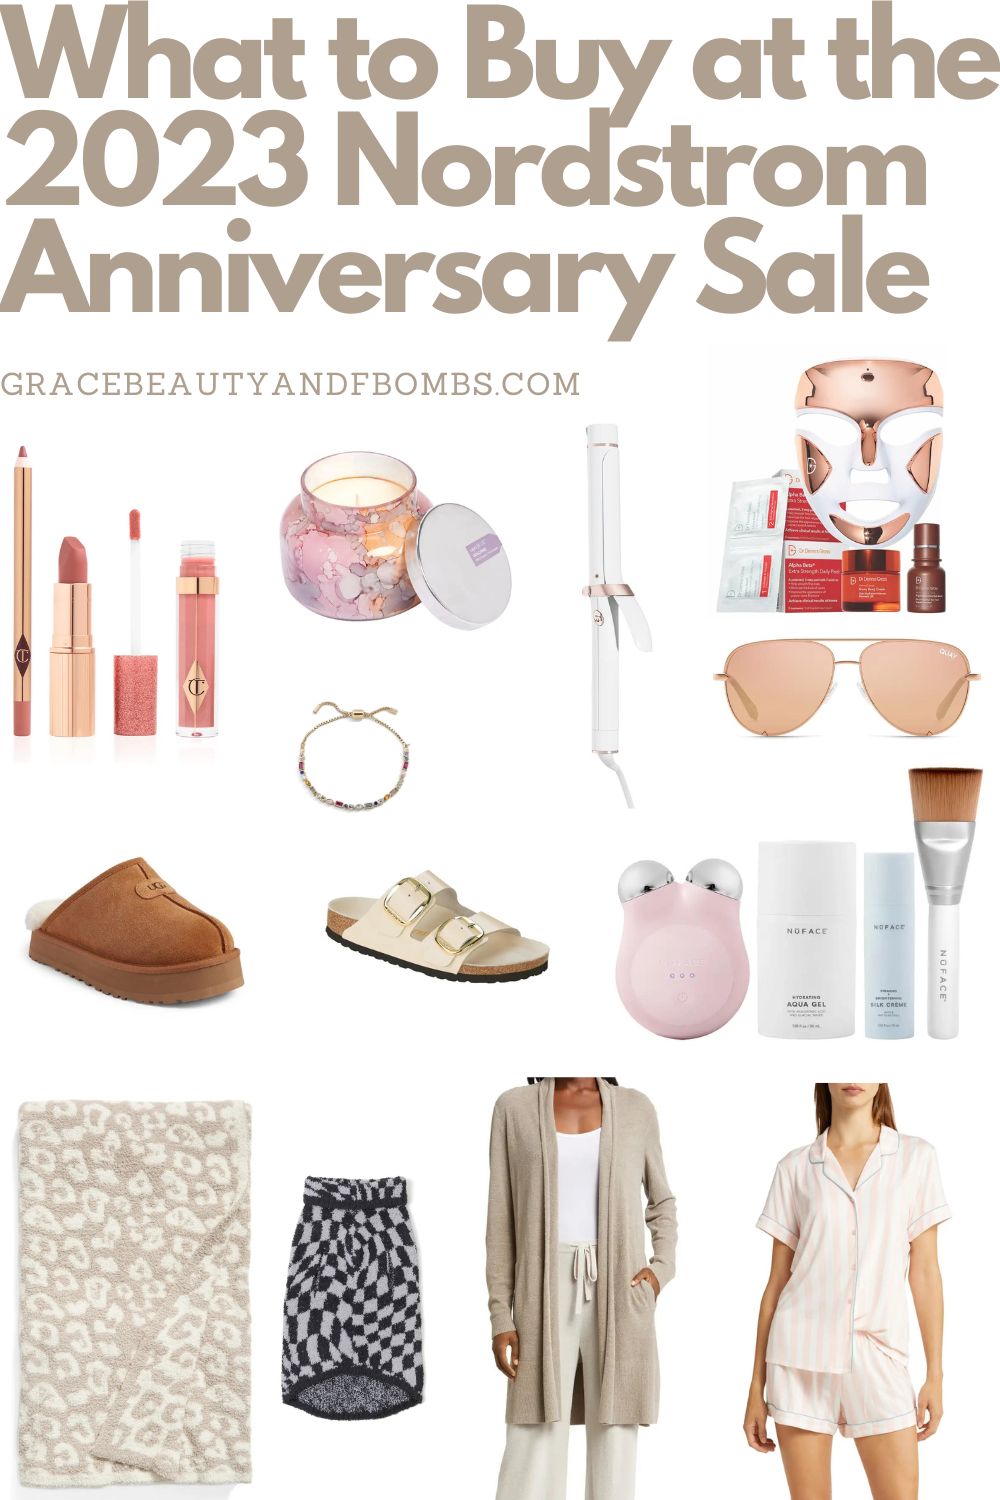 My Top Finds for the 2023 Nordstrom Anniversary Sale! Grace, Beauty